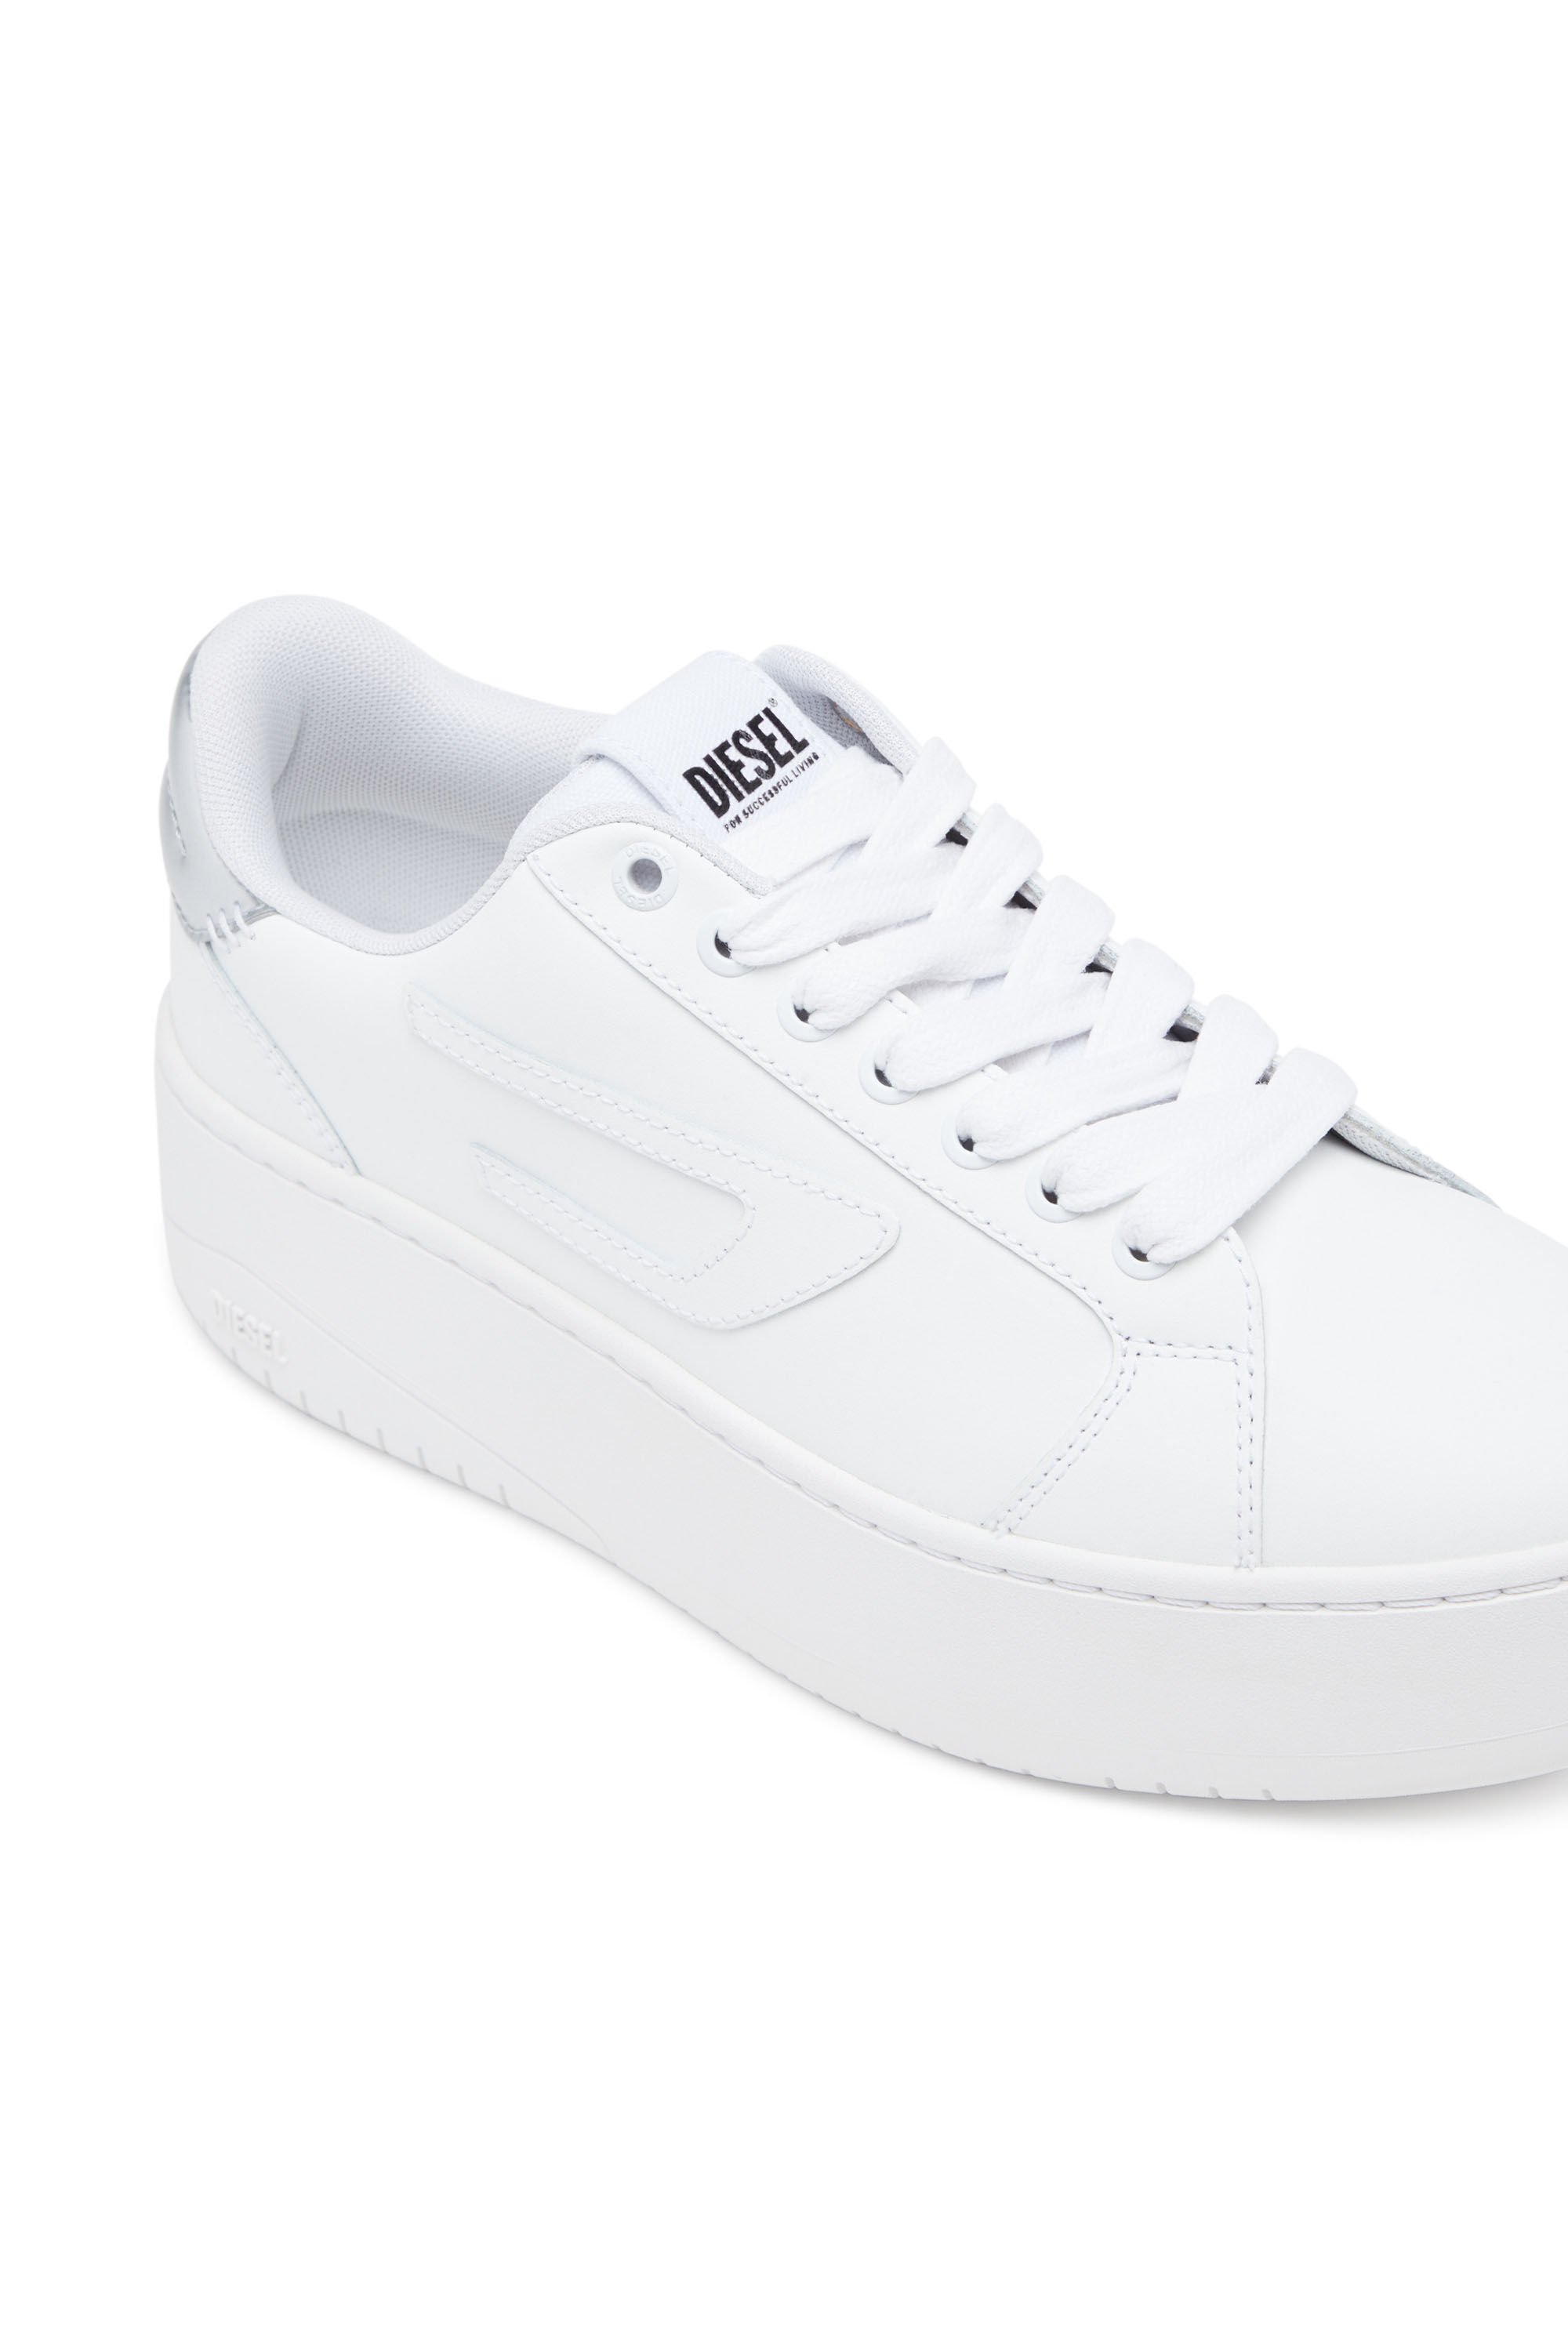 Diesel - S-ATHENE BOLD W, Woman S-Athene Bold-Low-top sneakers with flatform sole in White - Image 6